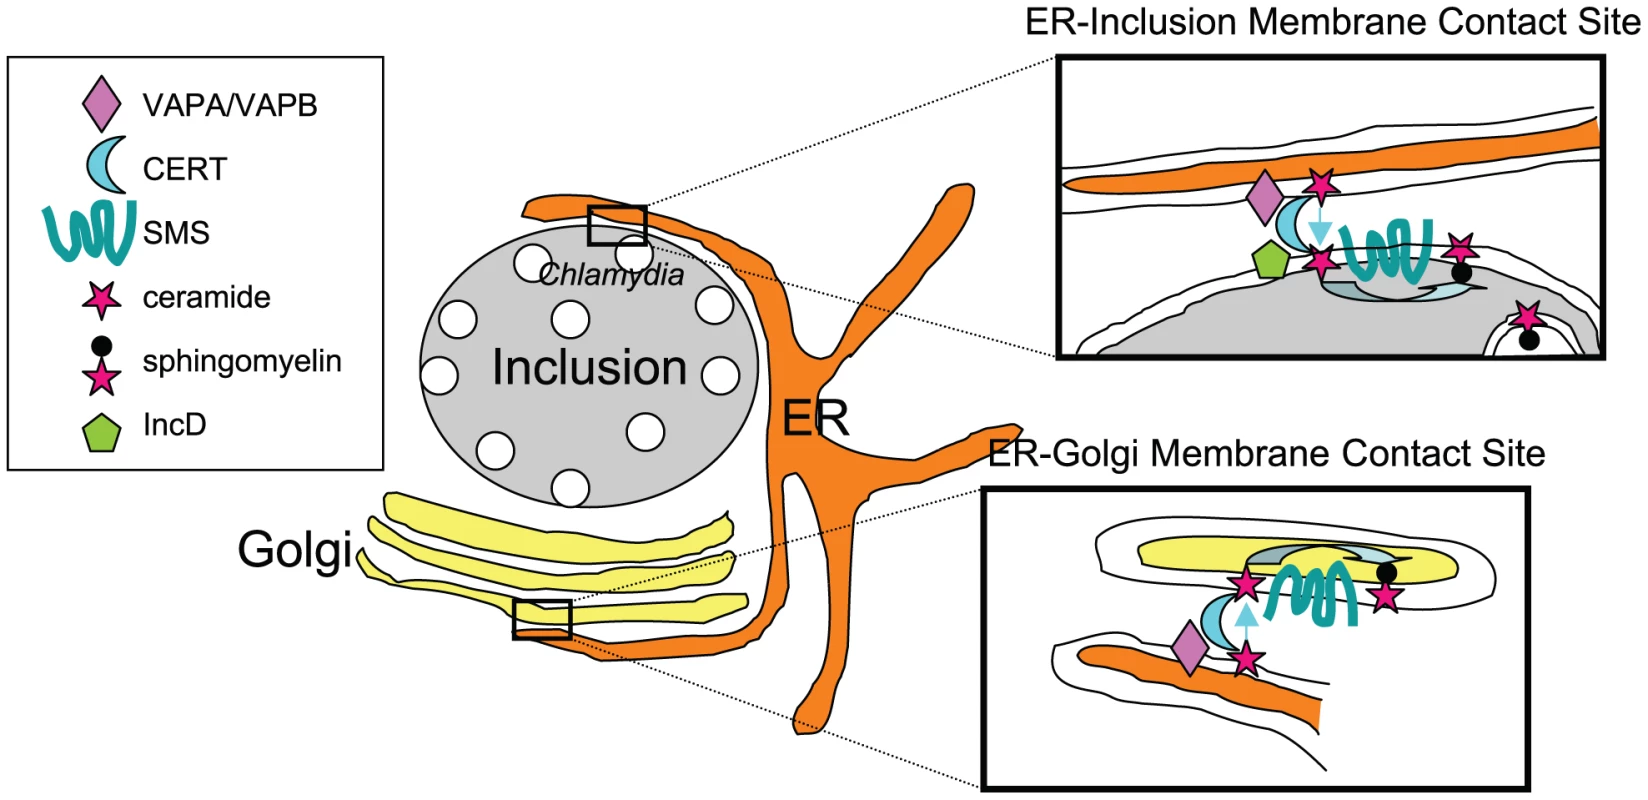 Direct transport of ceramide from the ER to <i>C. trachomatis</i> inclusion.